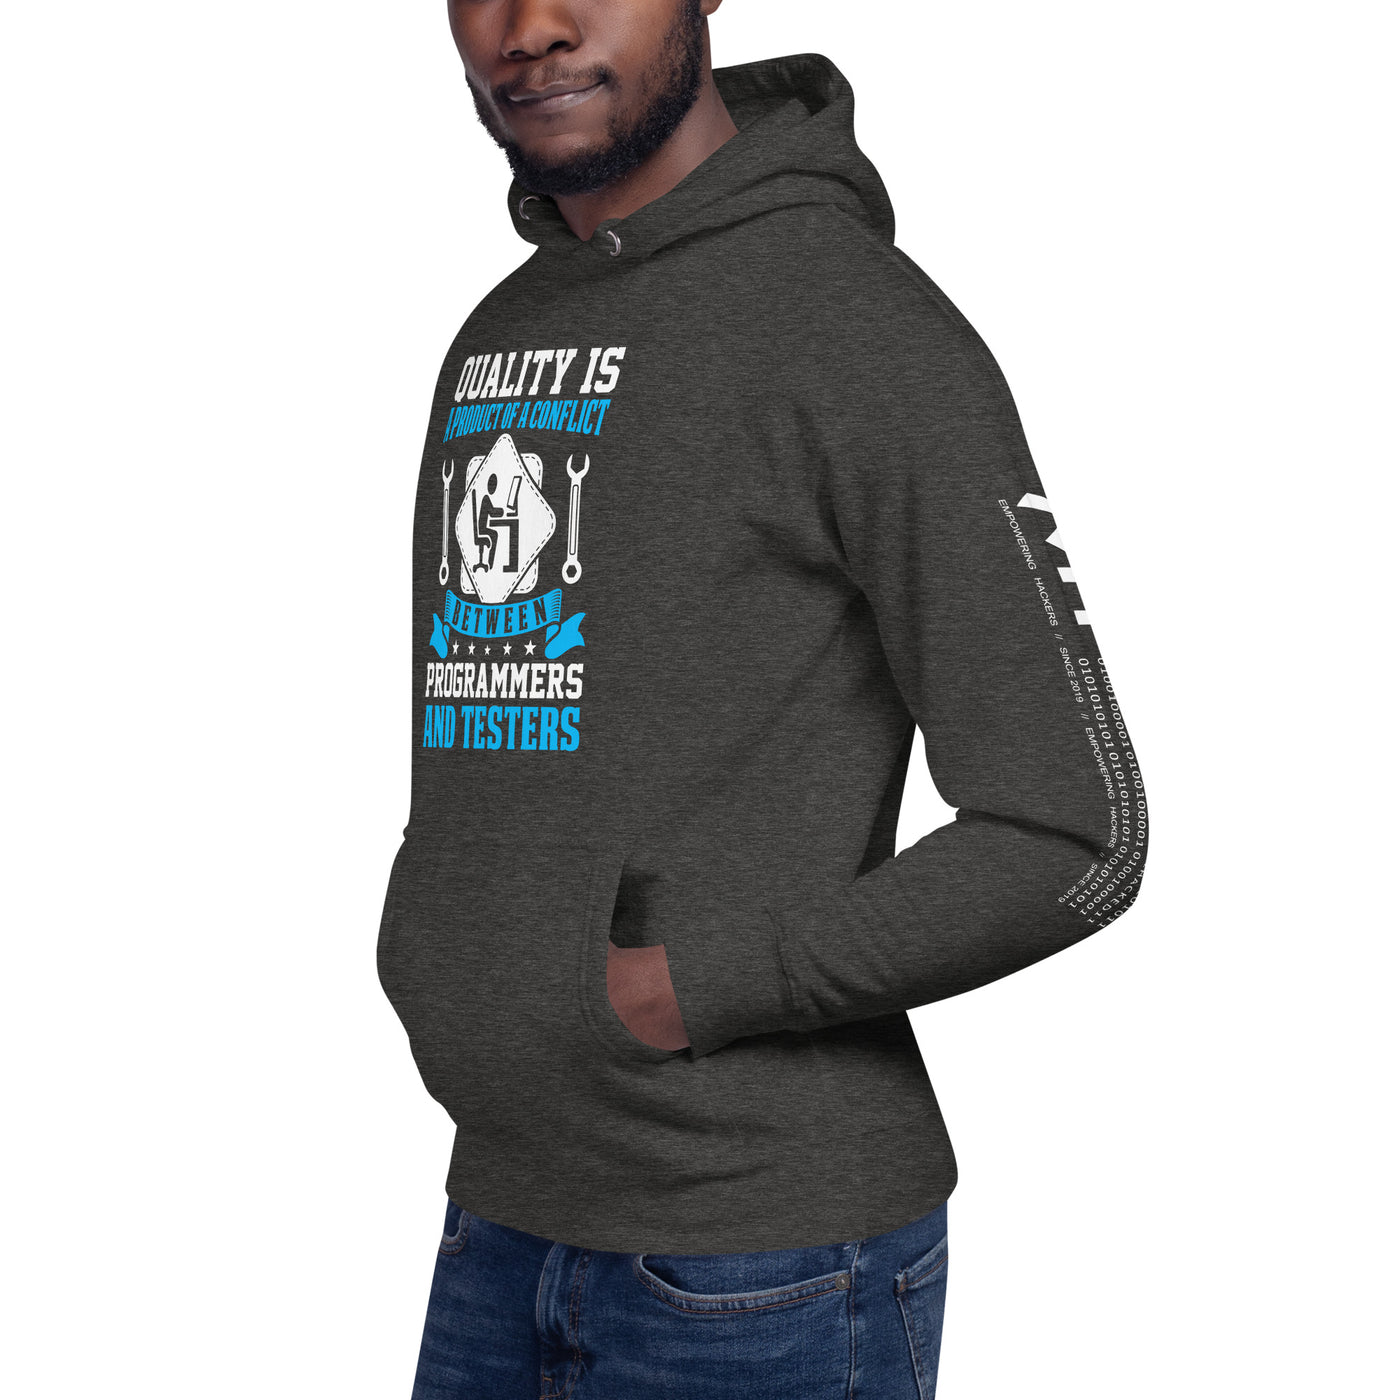 Quality is a Product of a conflict - Unisex Hoodie